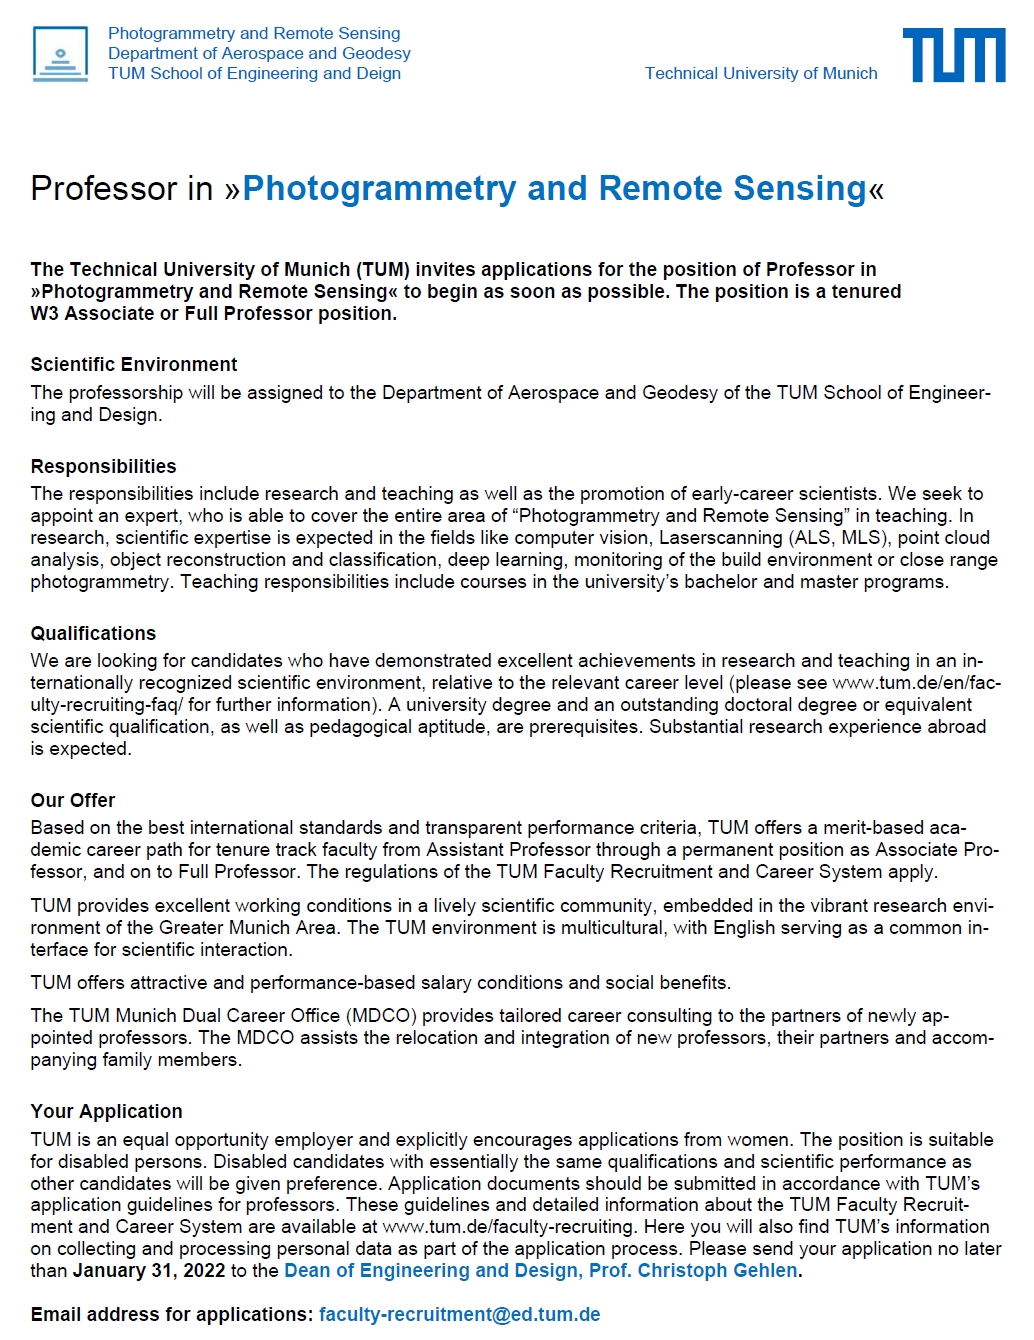 Call Photogrammetry and Remote Sensing